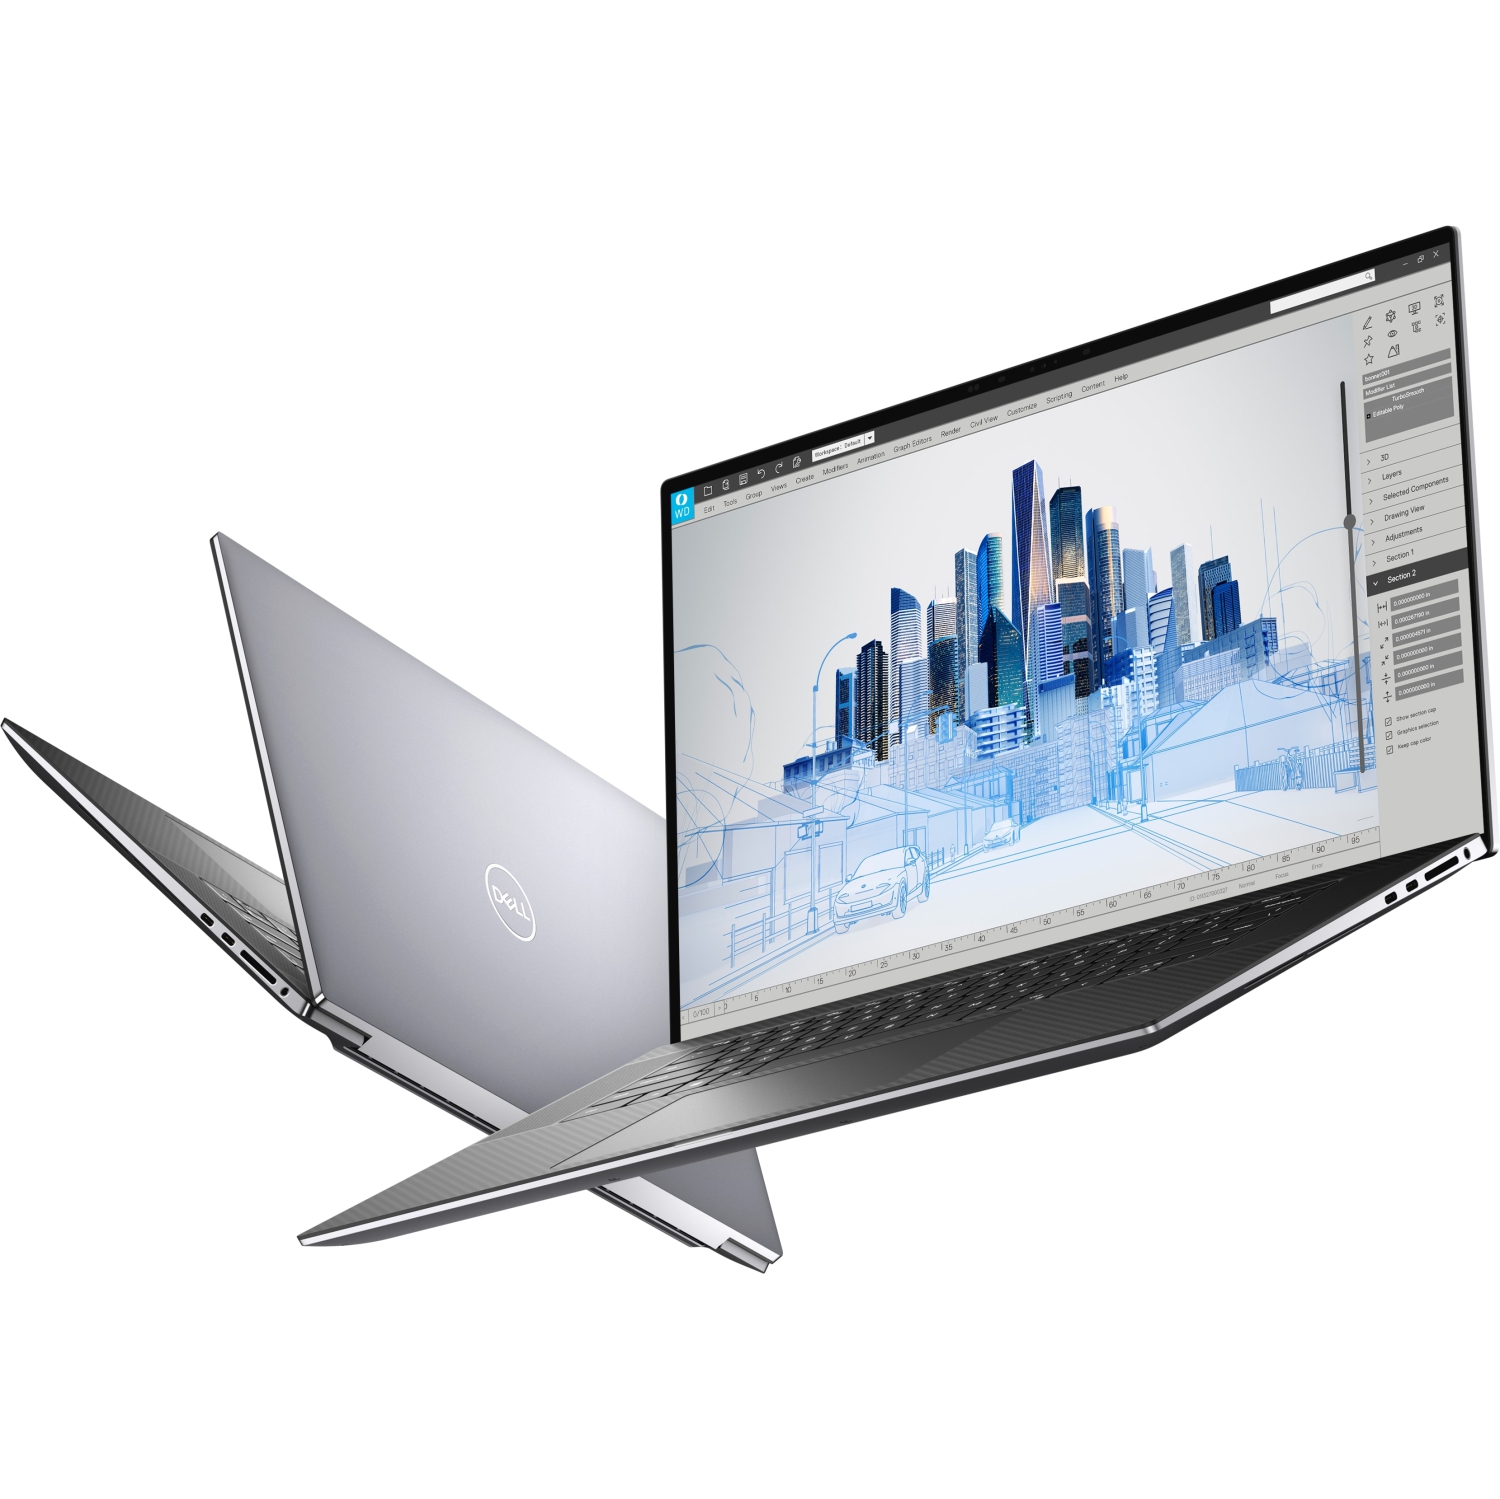 Refurbished (Excellent) – Dell Precision 5000 5760 Workstation Laptop (2021) | 17" FHD+ | Core i5 - 512GB SSD - 16GB RAM - RTX A2000 | 6 Cores @ 4.6 GHz - 11th Gen CPU